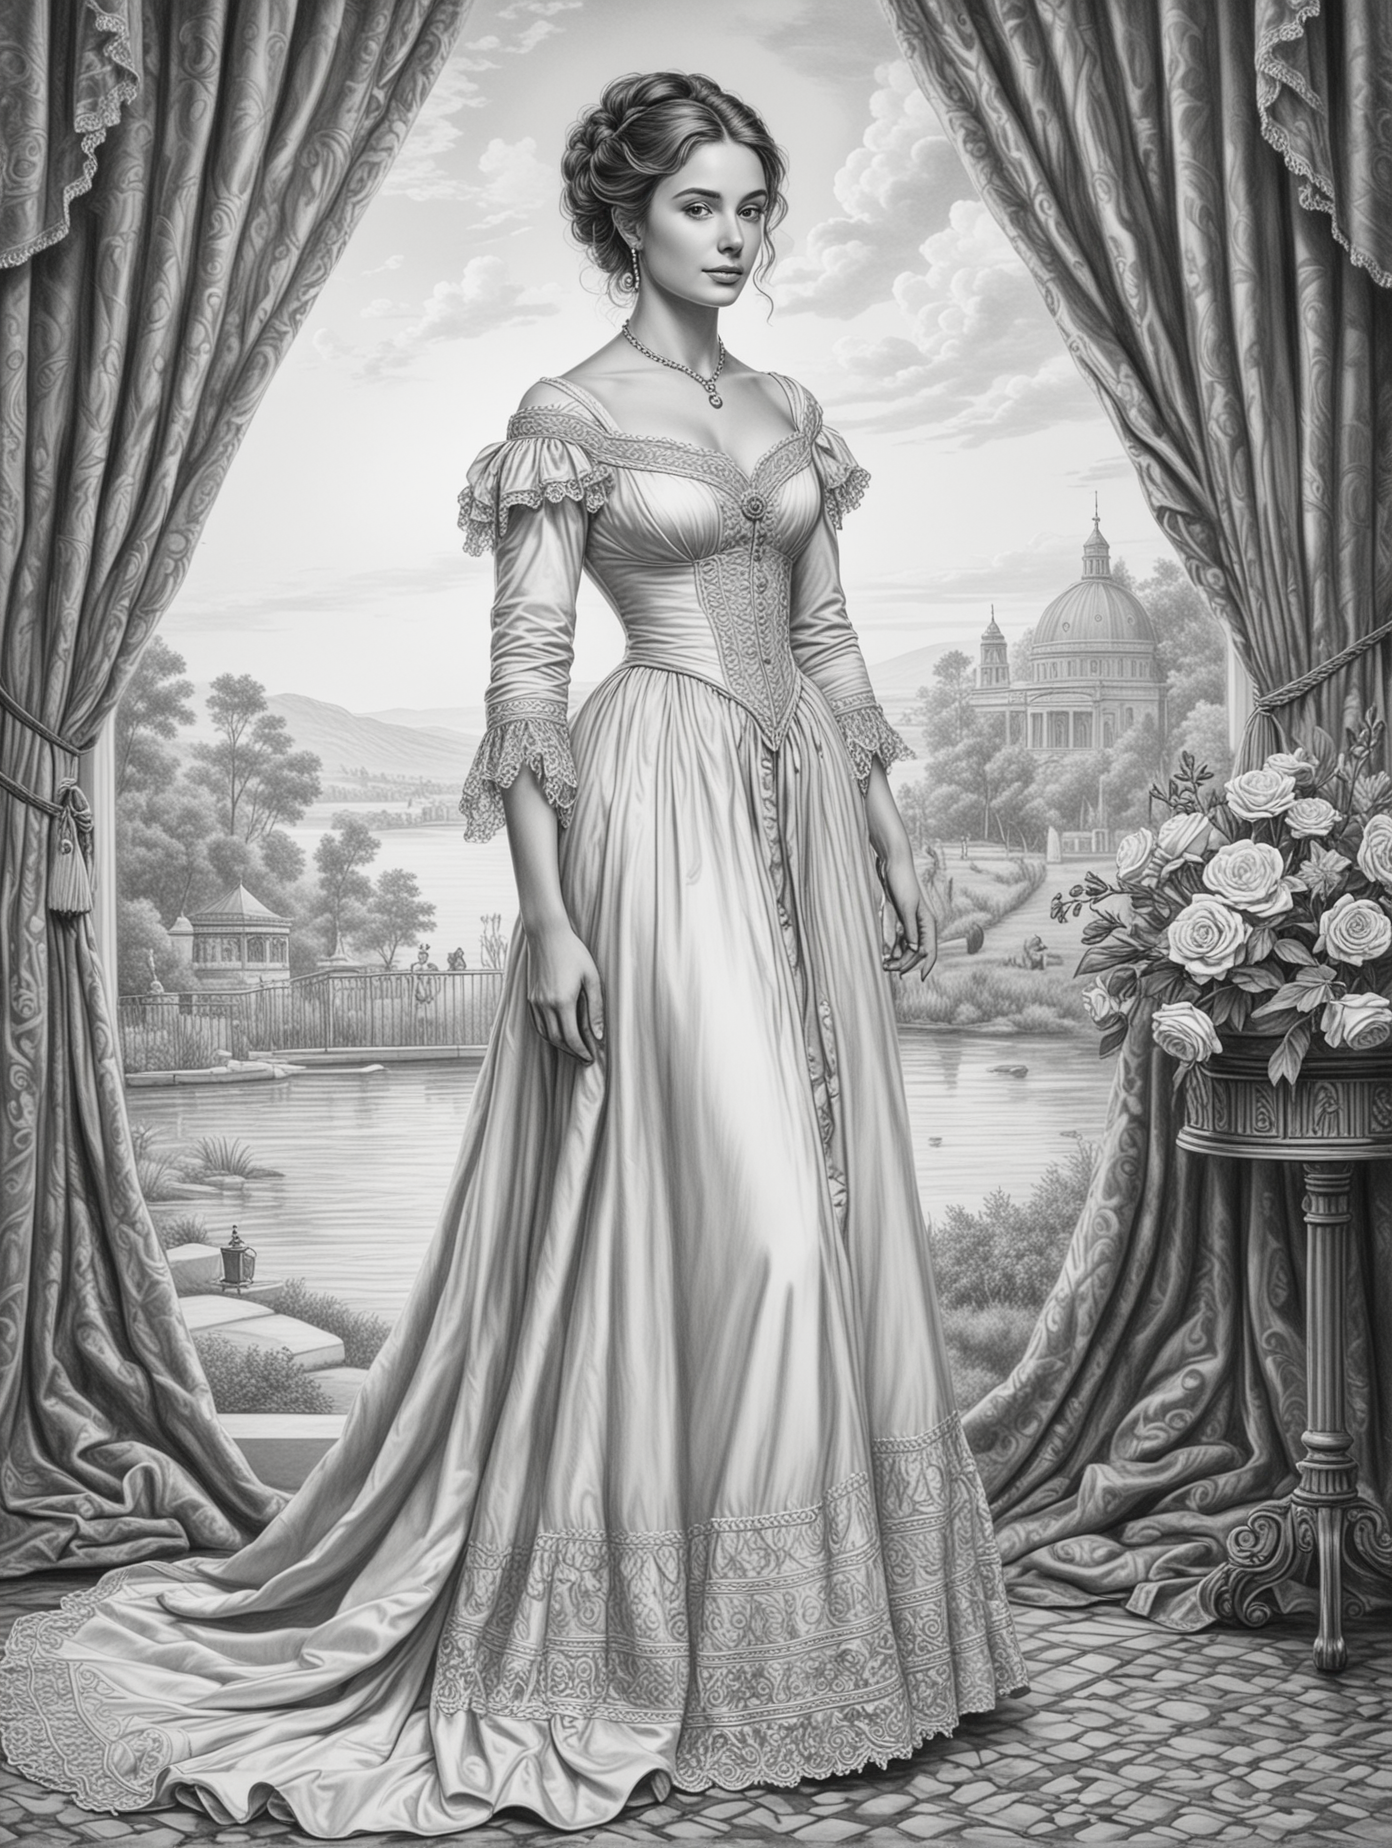 For an adult coloring page, realistic black and white illustration of a beautiful romantic woman from the regency era,  full length 